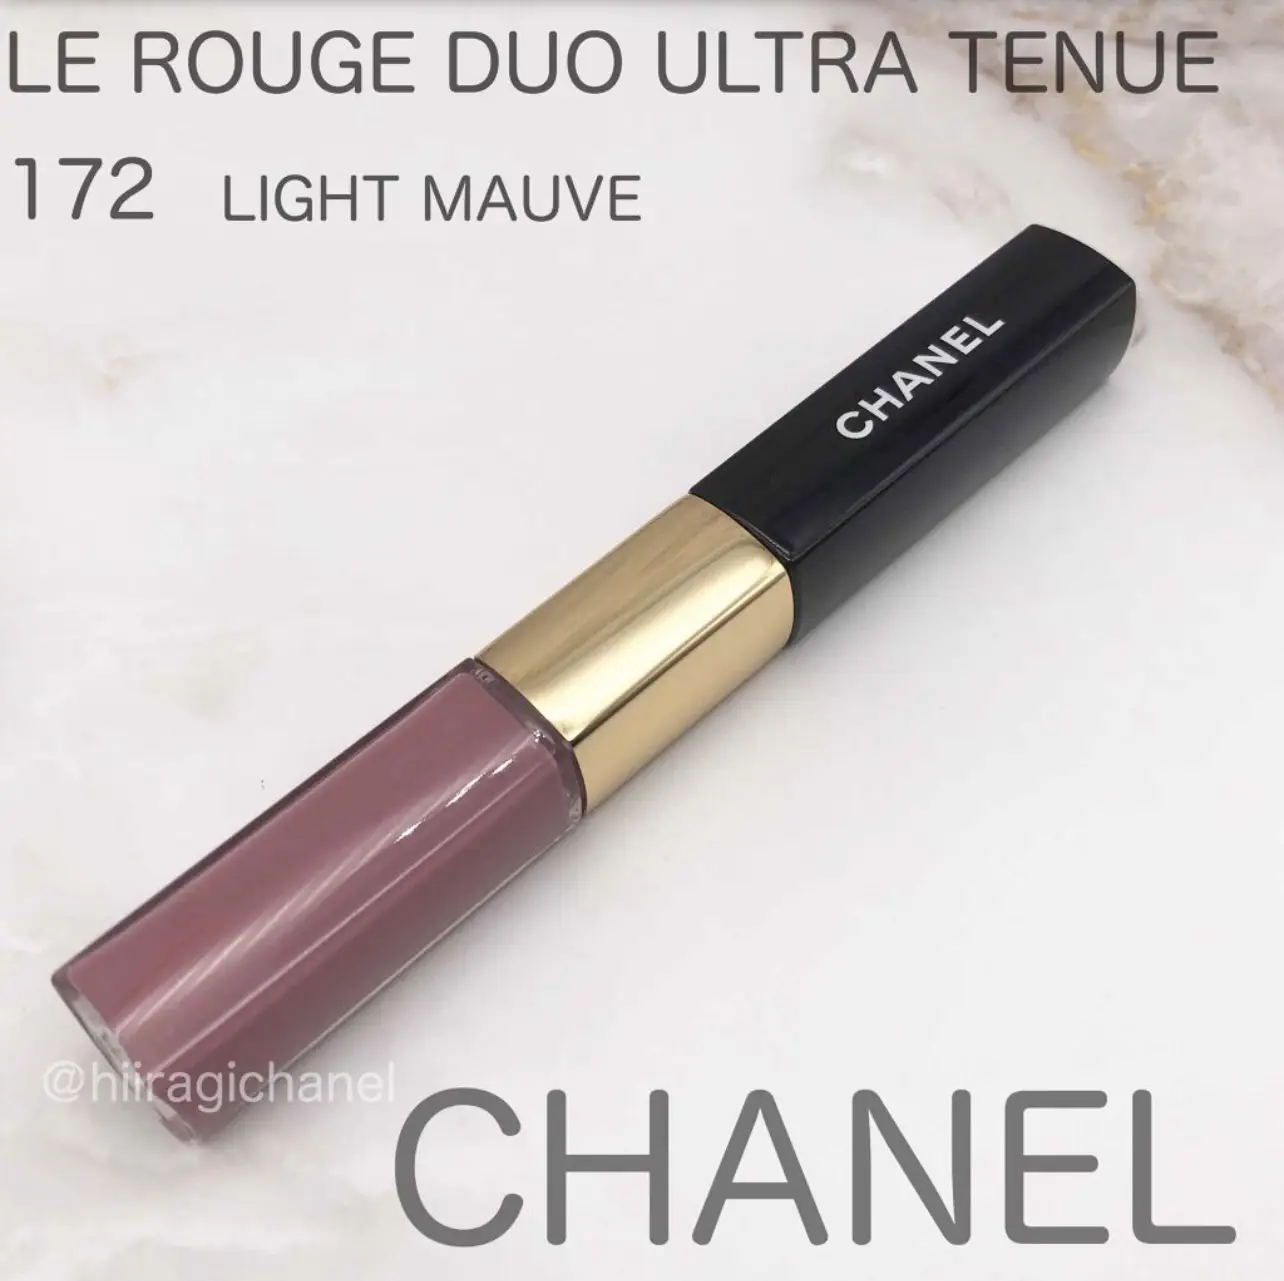 The savior of mask makeup / Chanel's lip is amazing!, Gallery posted by  ひいらぎ💄美容オタク